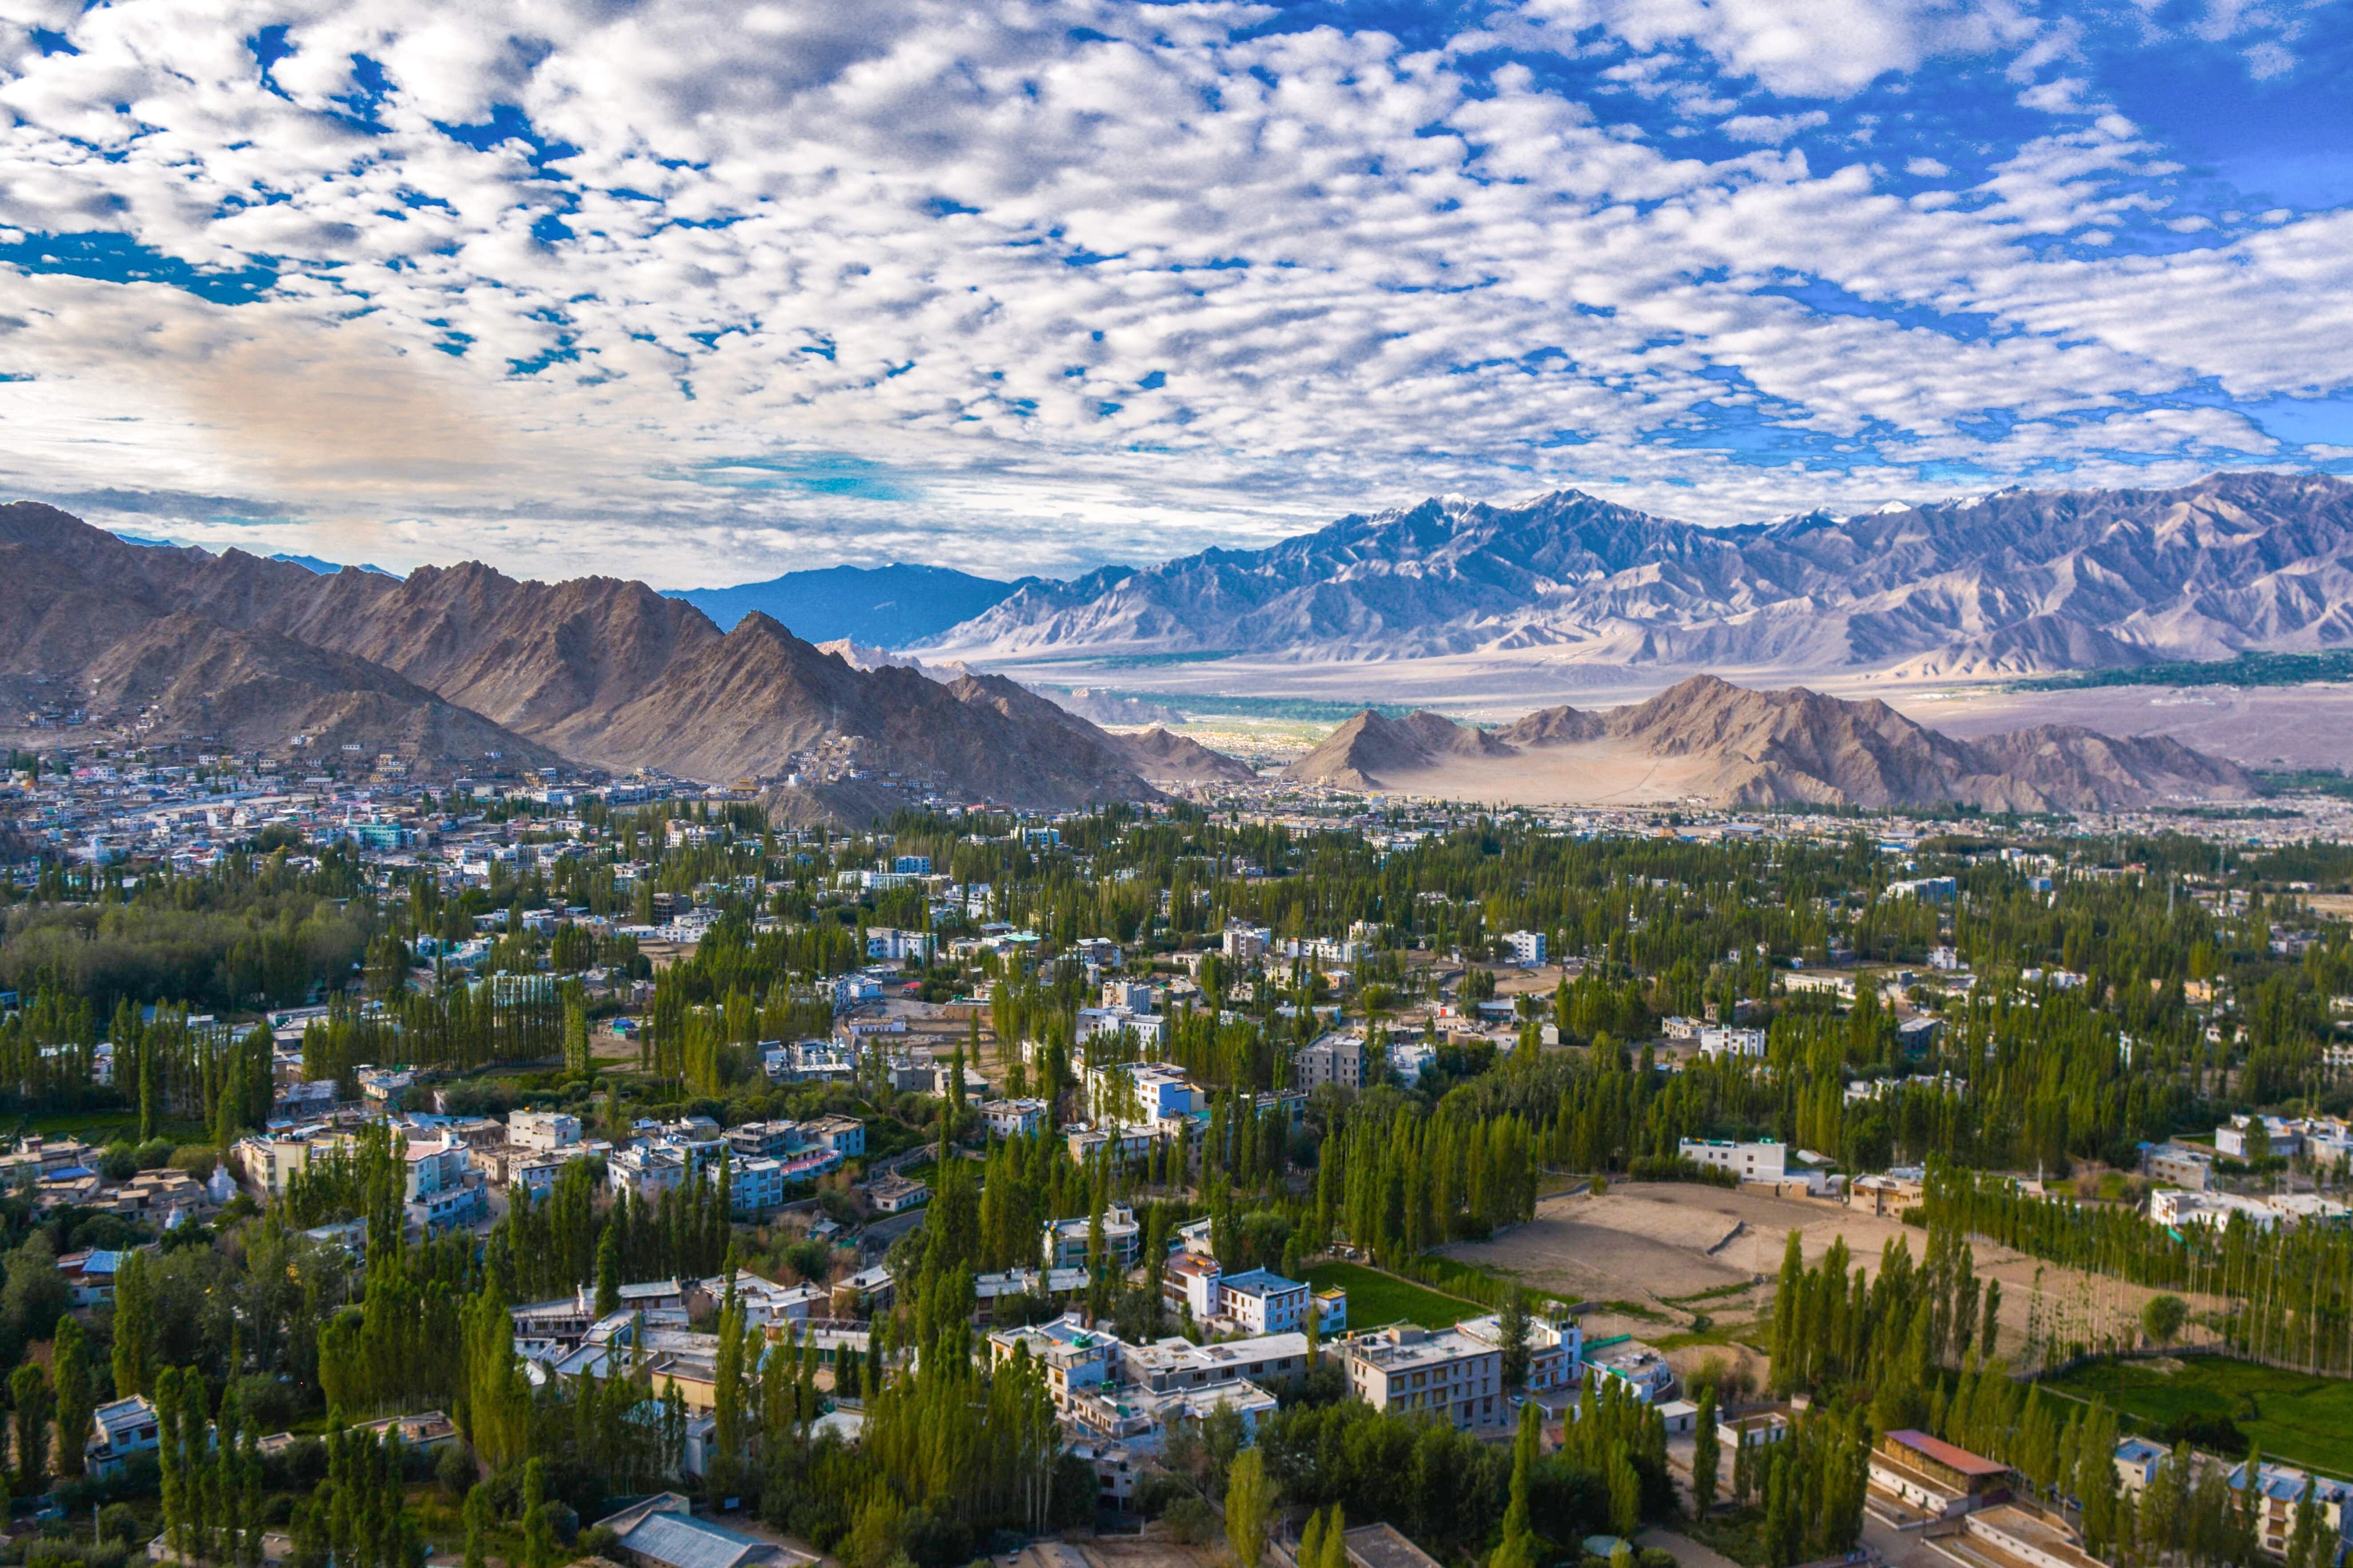 A general view shows the city of Leh in the union territory of Ladakh on August 7, 2020. Photo: AFP